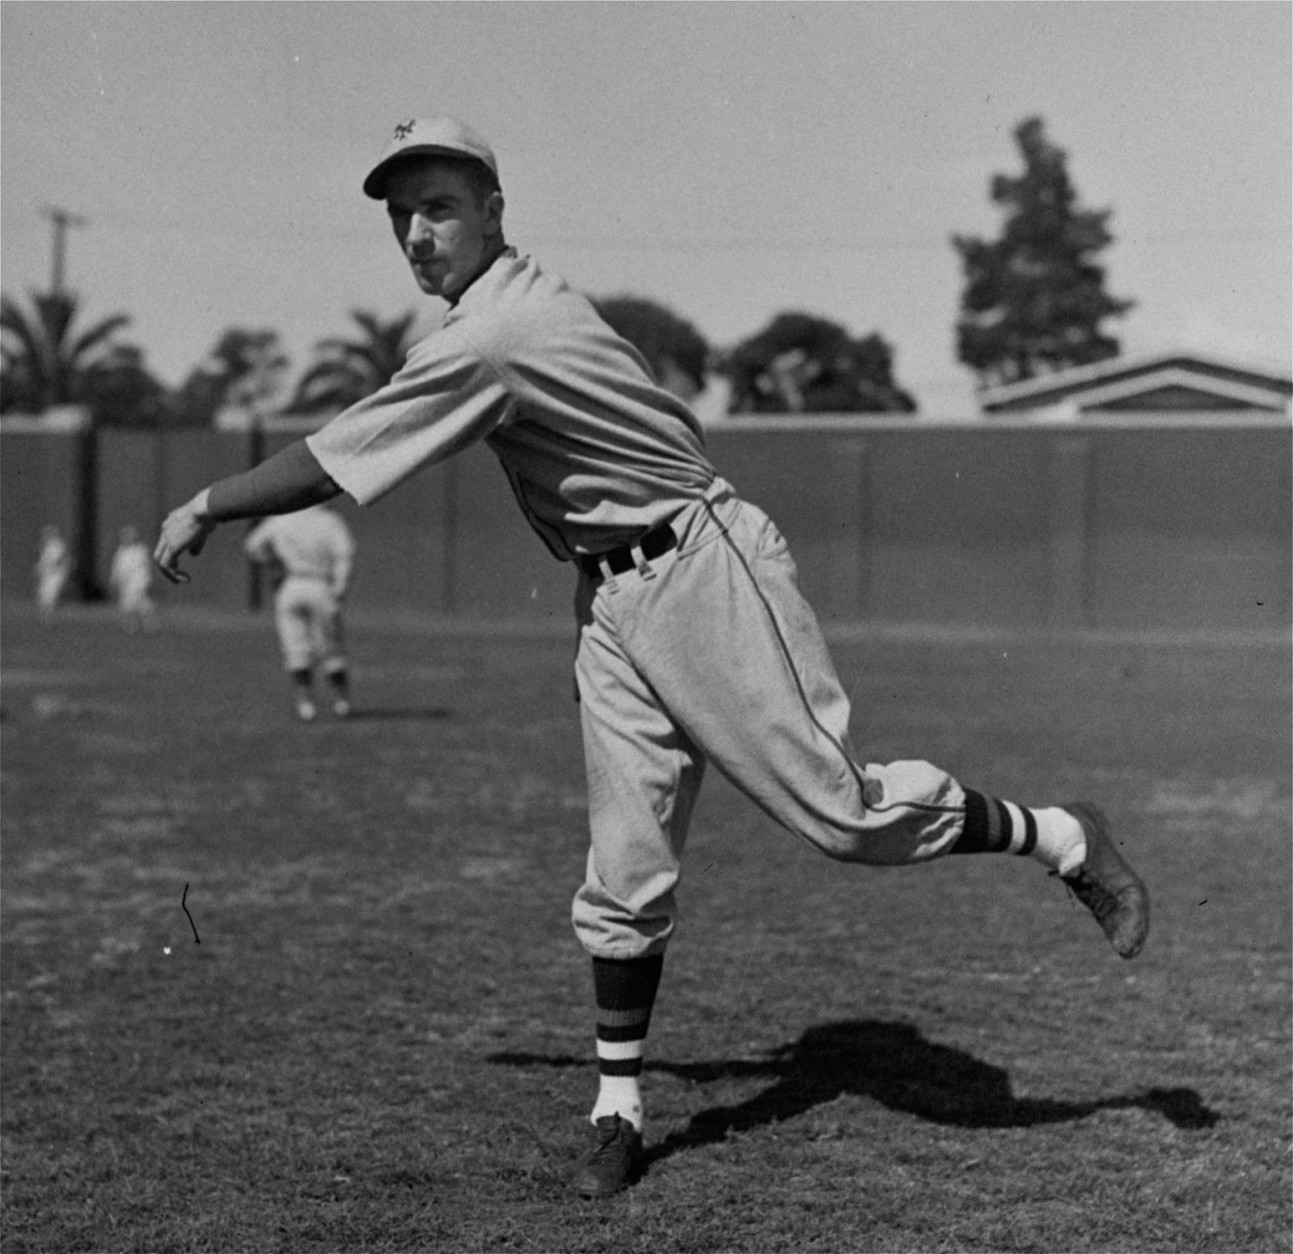 New York Giants pitcher Carl Hubbell, known as the king of the screwball, throws a warmup pitch in 1932.